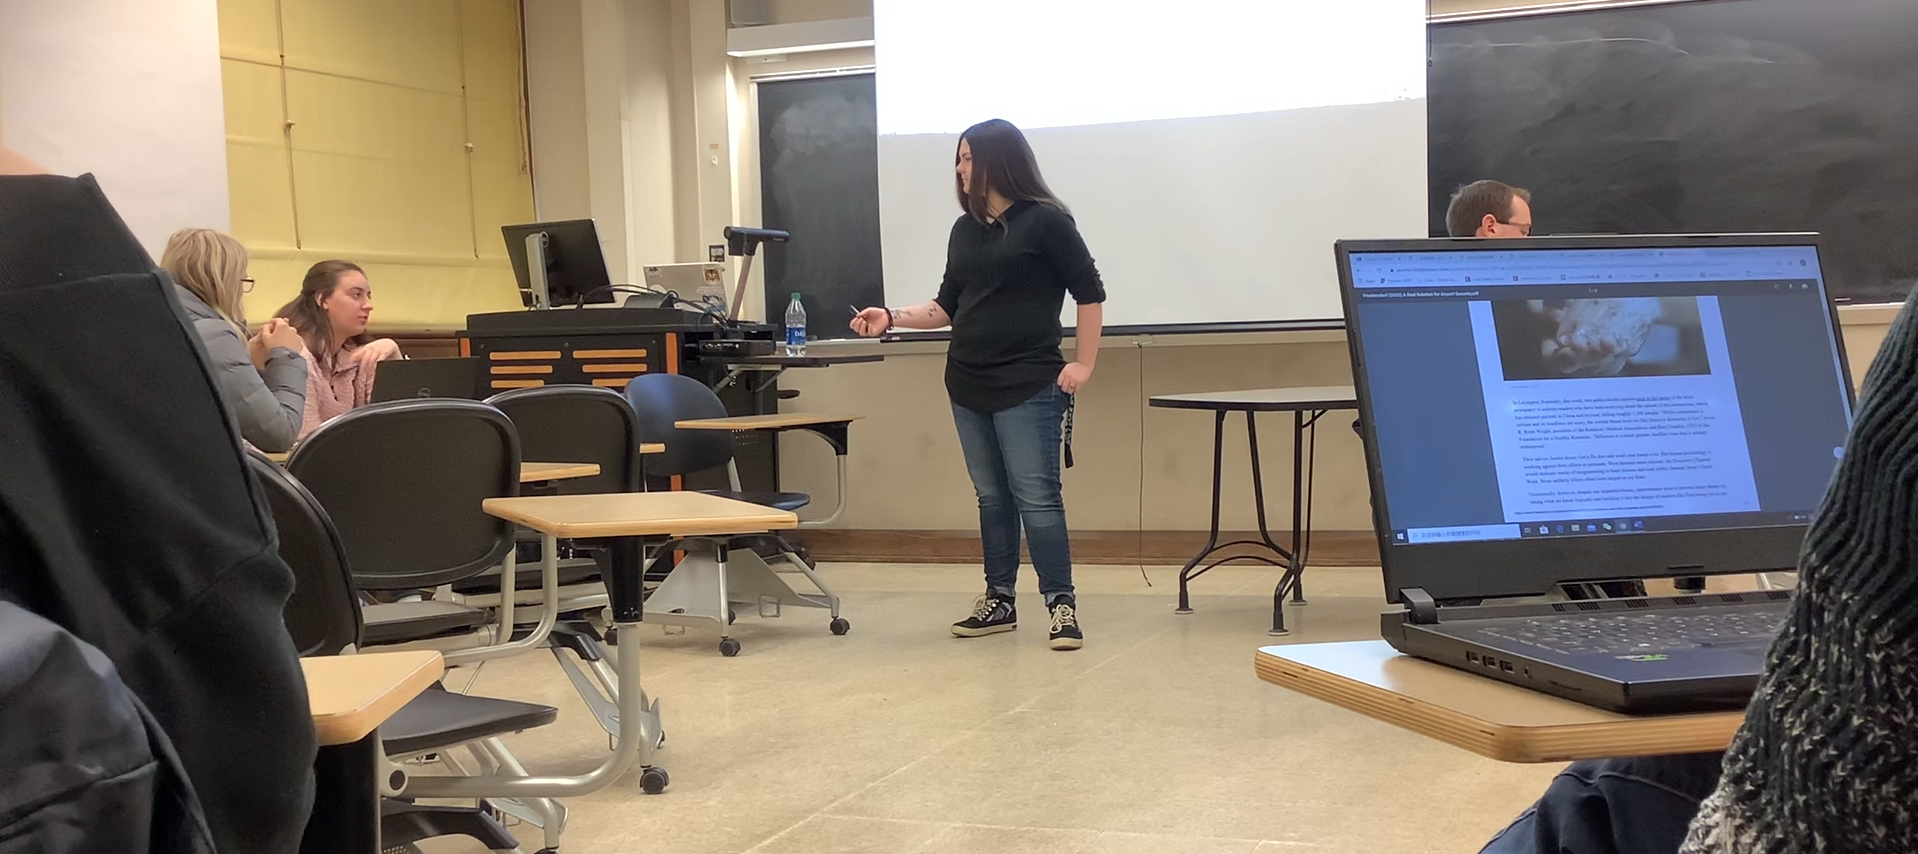 Picture of Victoria Braegger, a woman with long brunette hair, wearing a black tunic sweater, blue jeans, and high tops standing in the center of a classroom. She is listening to a student's answer to a question with one arm extended and the other resting on her pocket. There is a projector screen and chalkboard behind her.